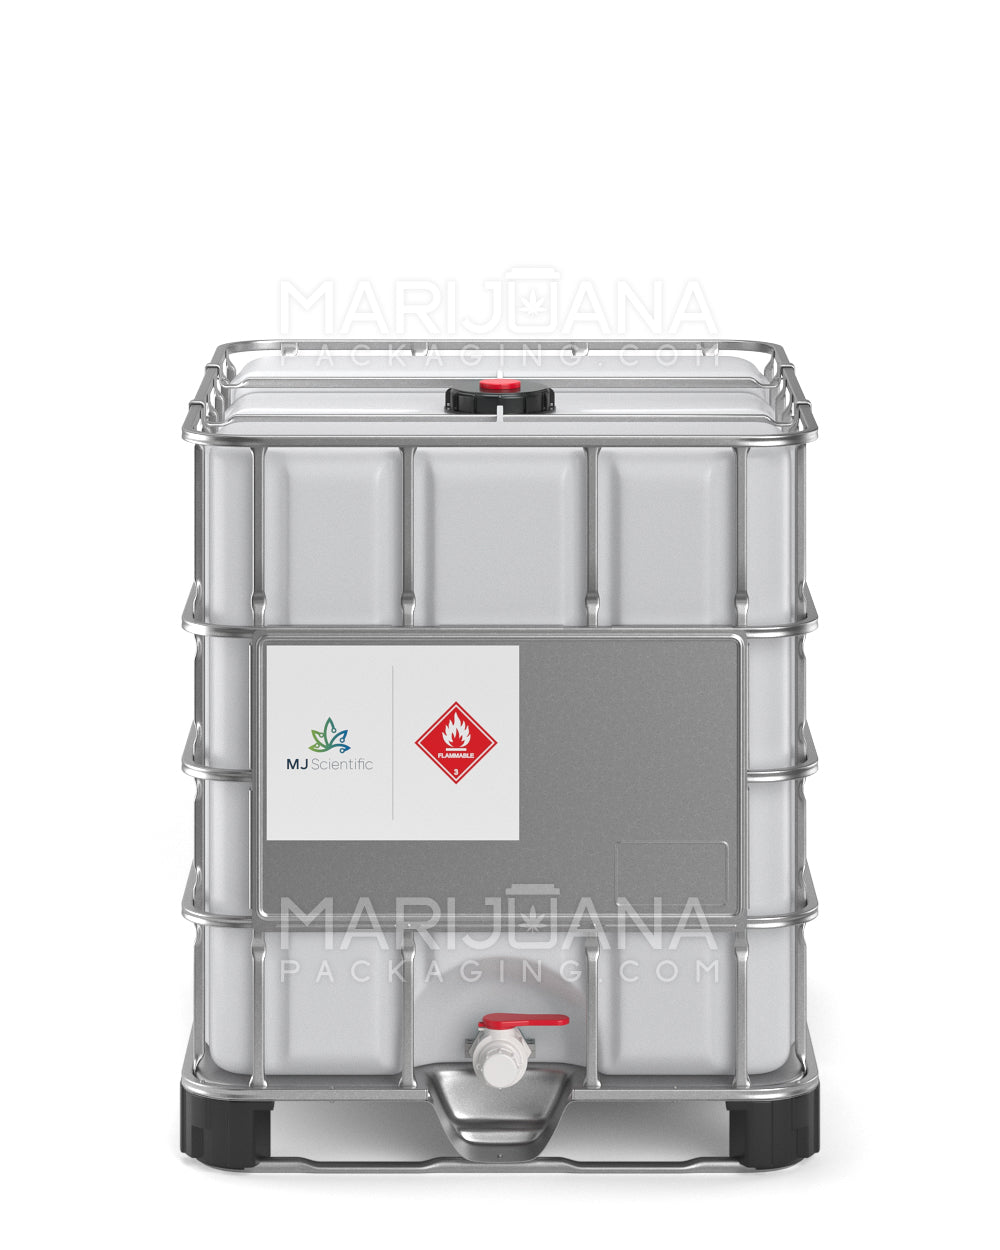 MJ SCIENTIFIC | Liquid Tote CDA 12A n-Heptane Ethanol Extraction Solvent | 1775lb Net - 275 Gallons